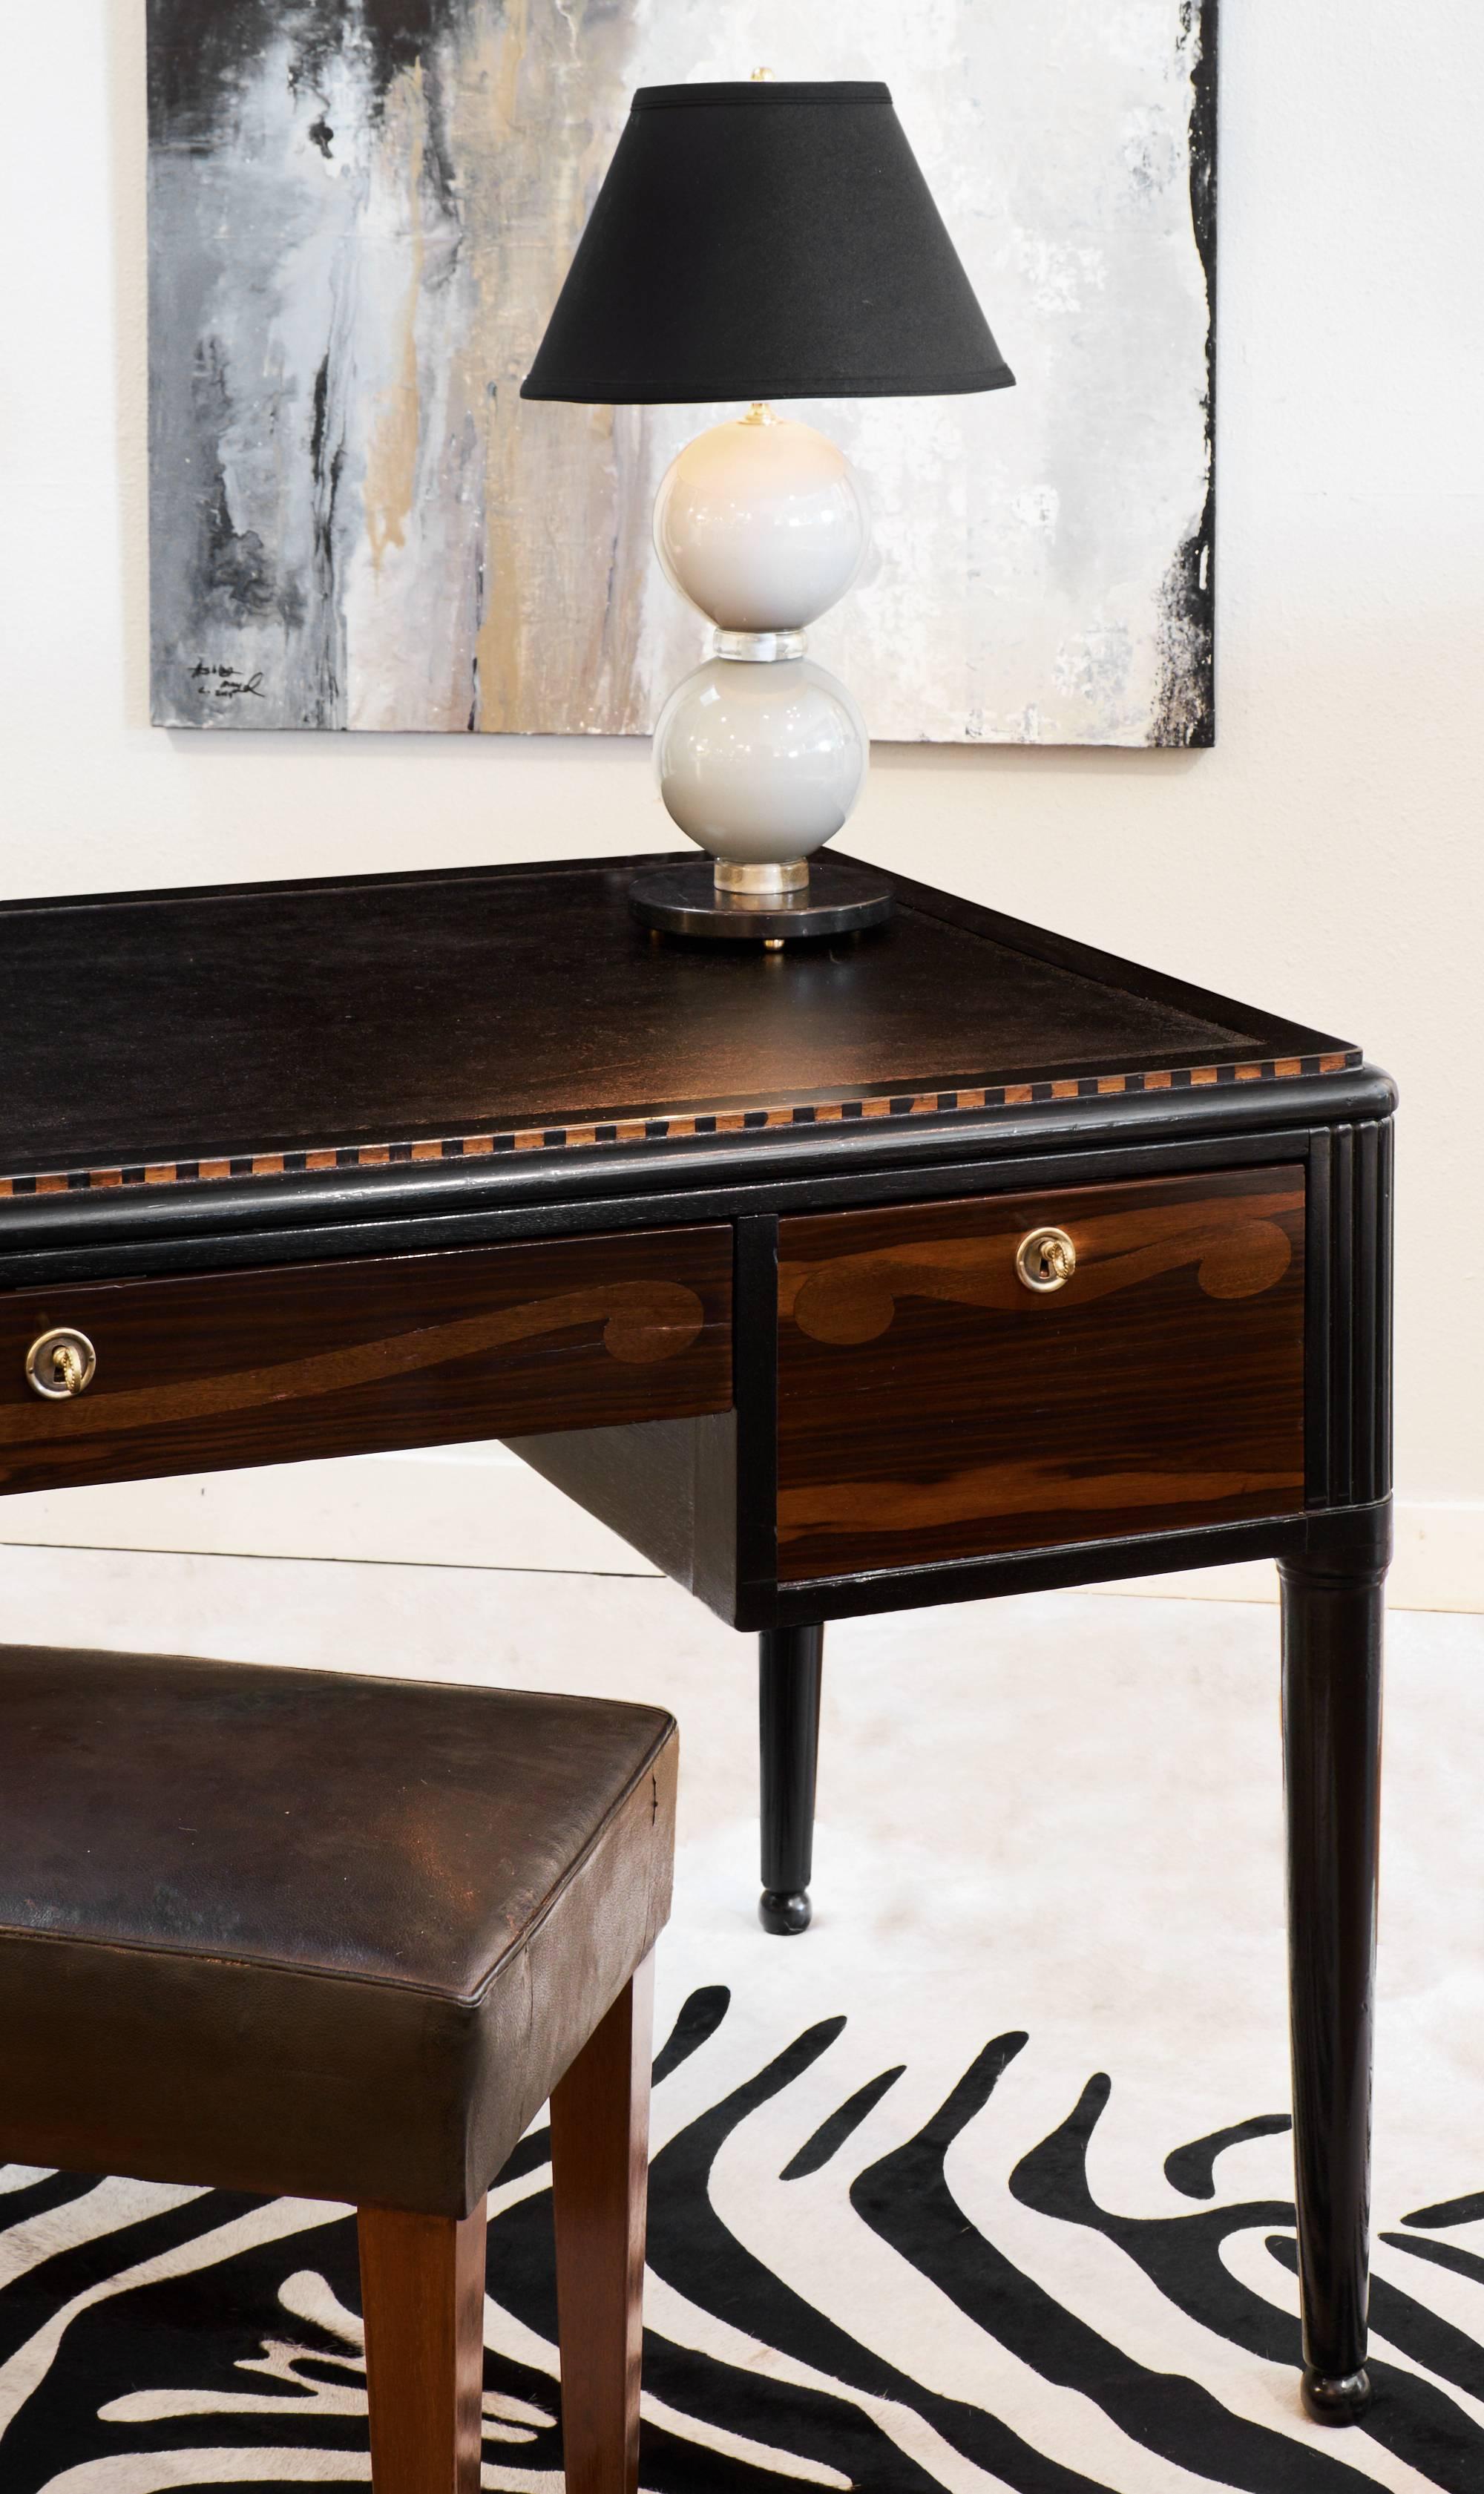 Rare French Art Deco desk of solid mahogany and tinted mahogany, in the manner of André Groult. Elegant rosewood marqueted pattern on its facade and inlaid frieze around its top. Ebonized with a lustrous French polish finish. Black moleskin top has